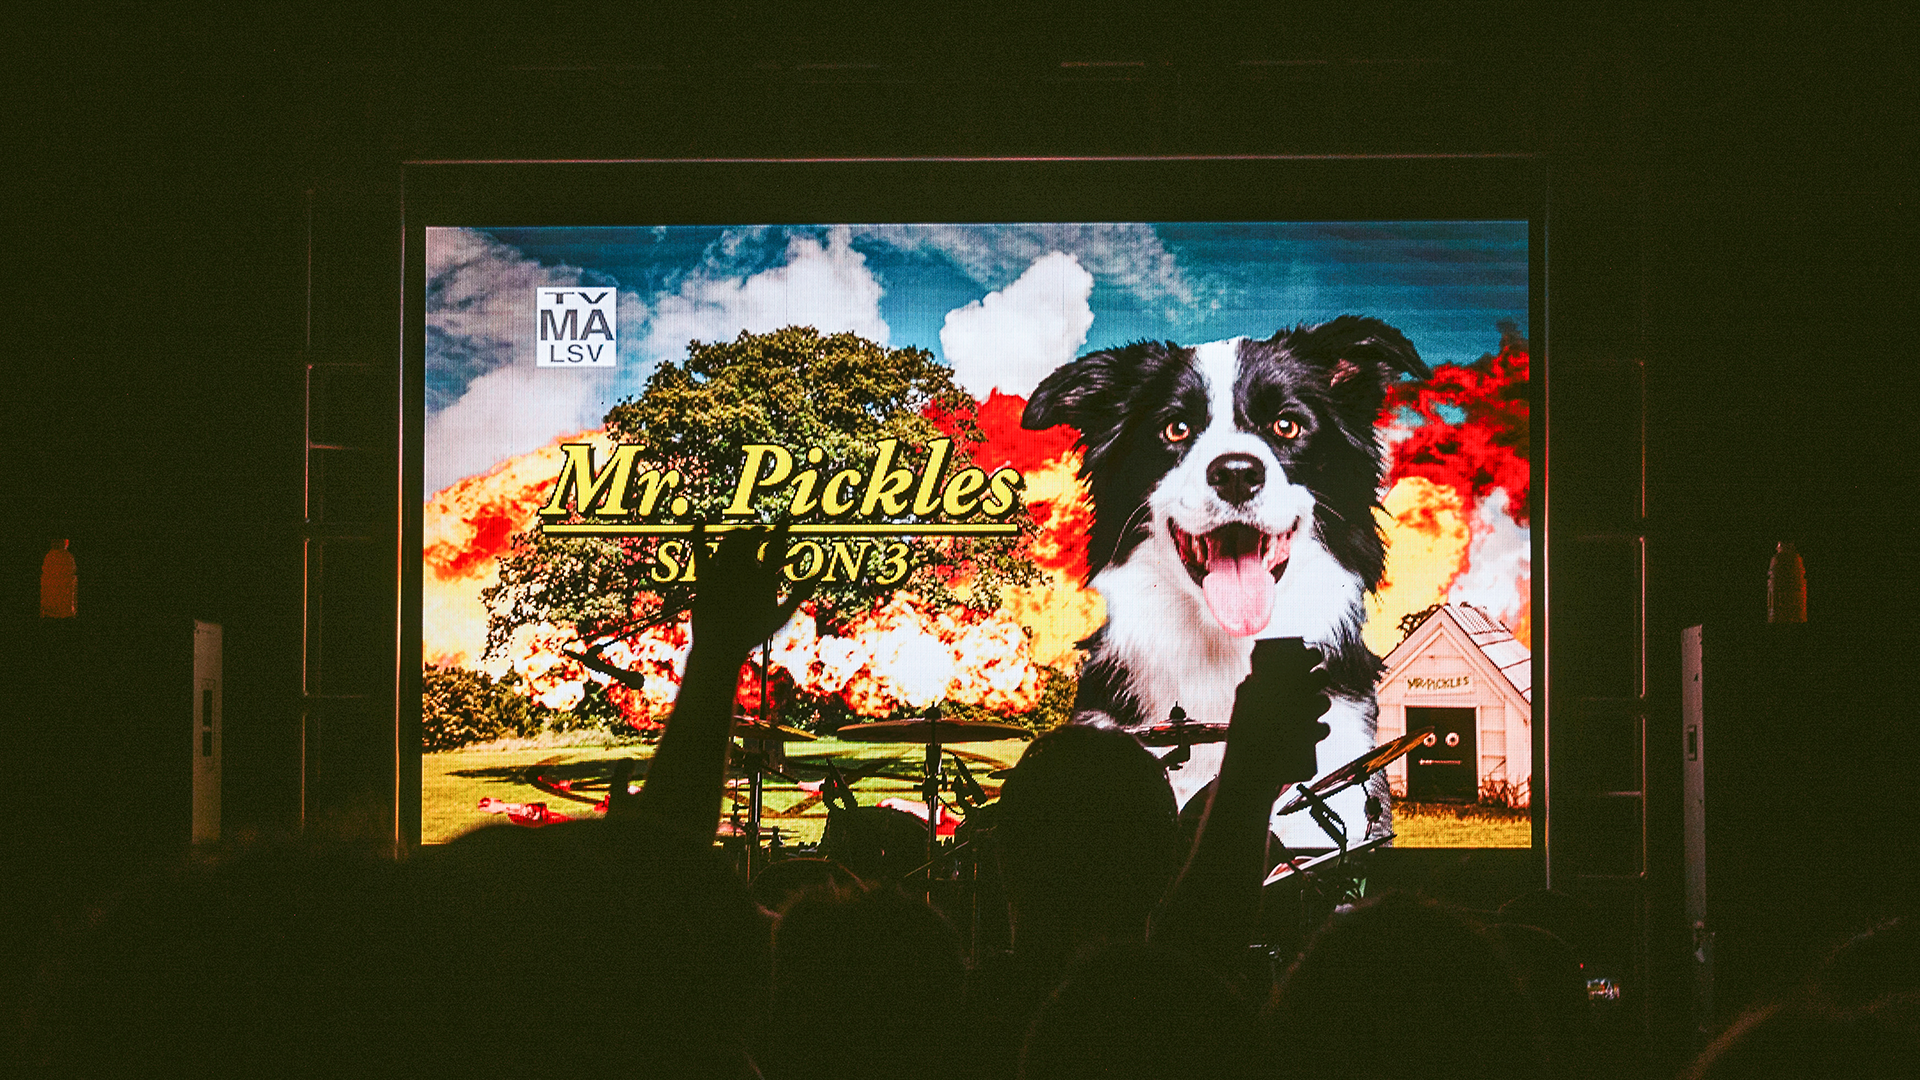 Mr. Pickles Thrashtacular: A Discussion with the creators of Adult